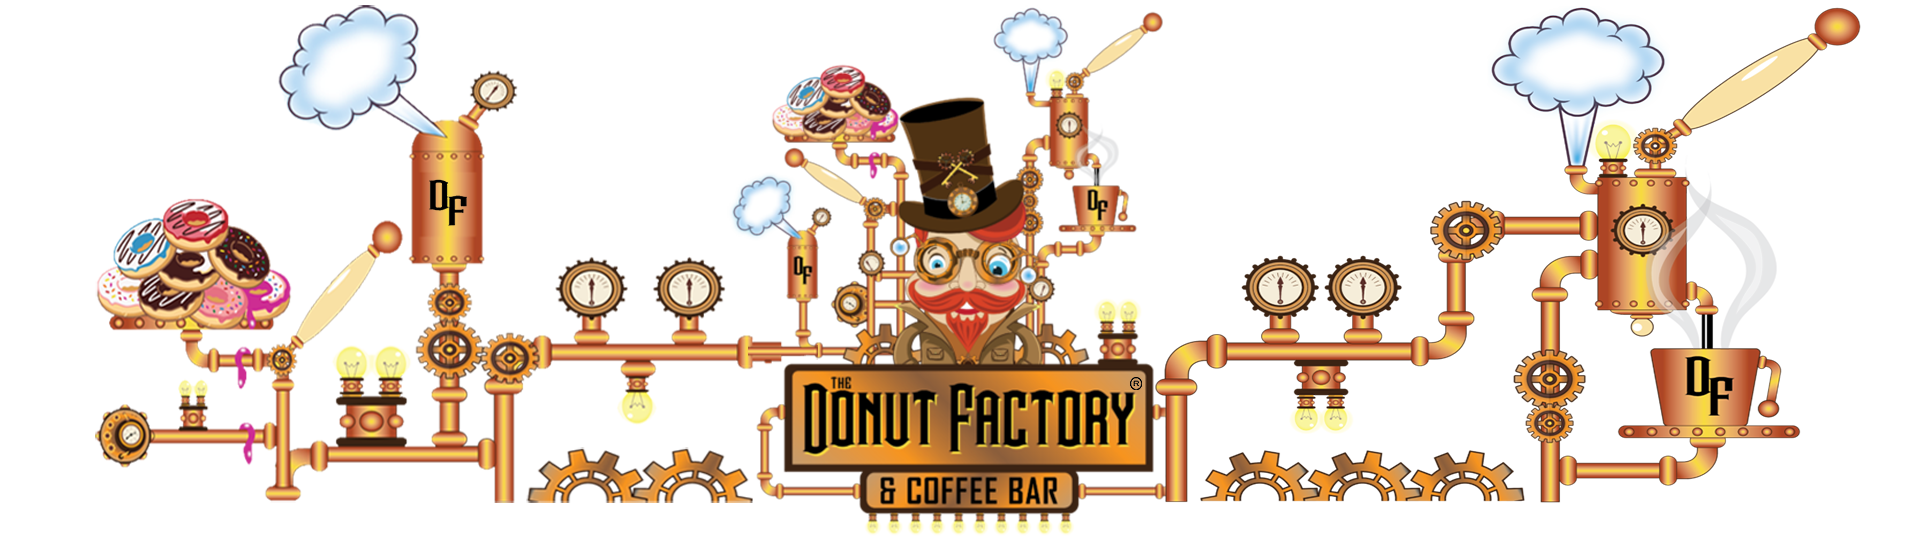 The real donut factory. Words clipart doughnut